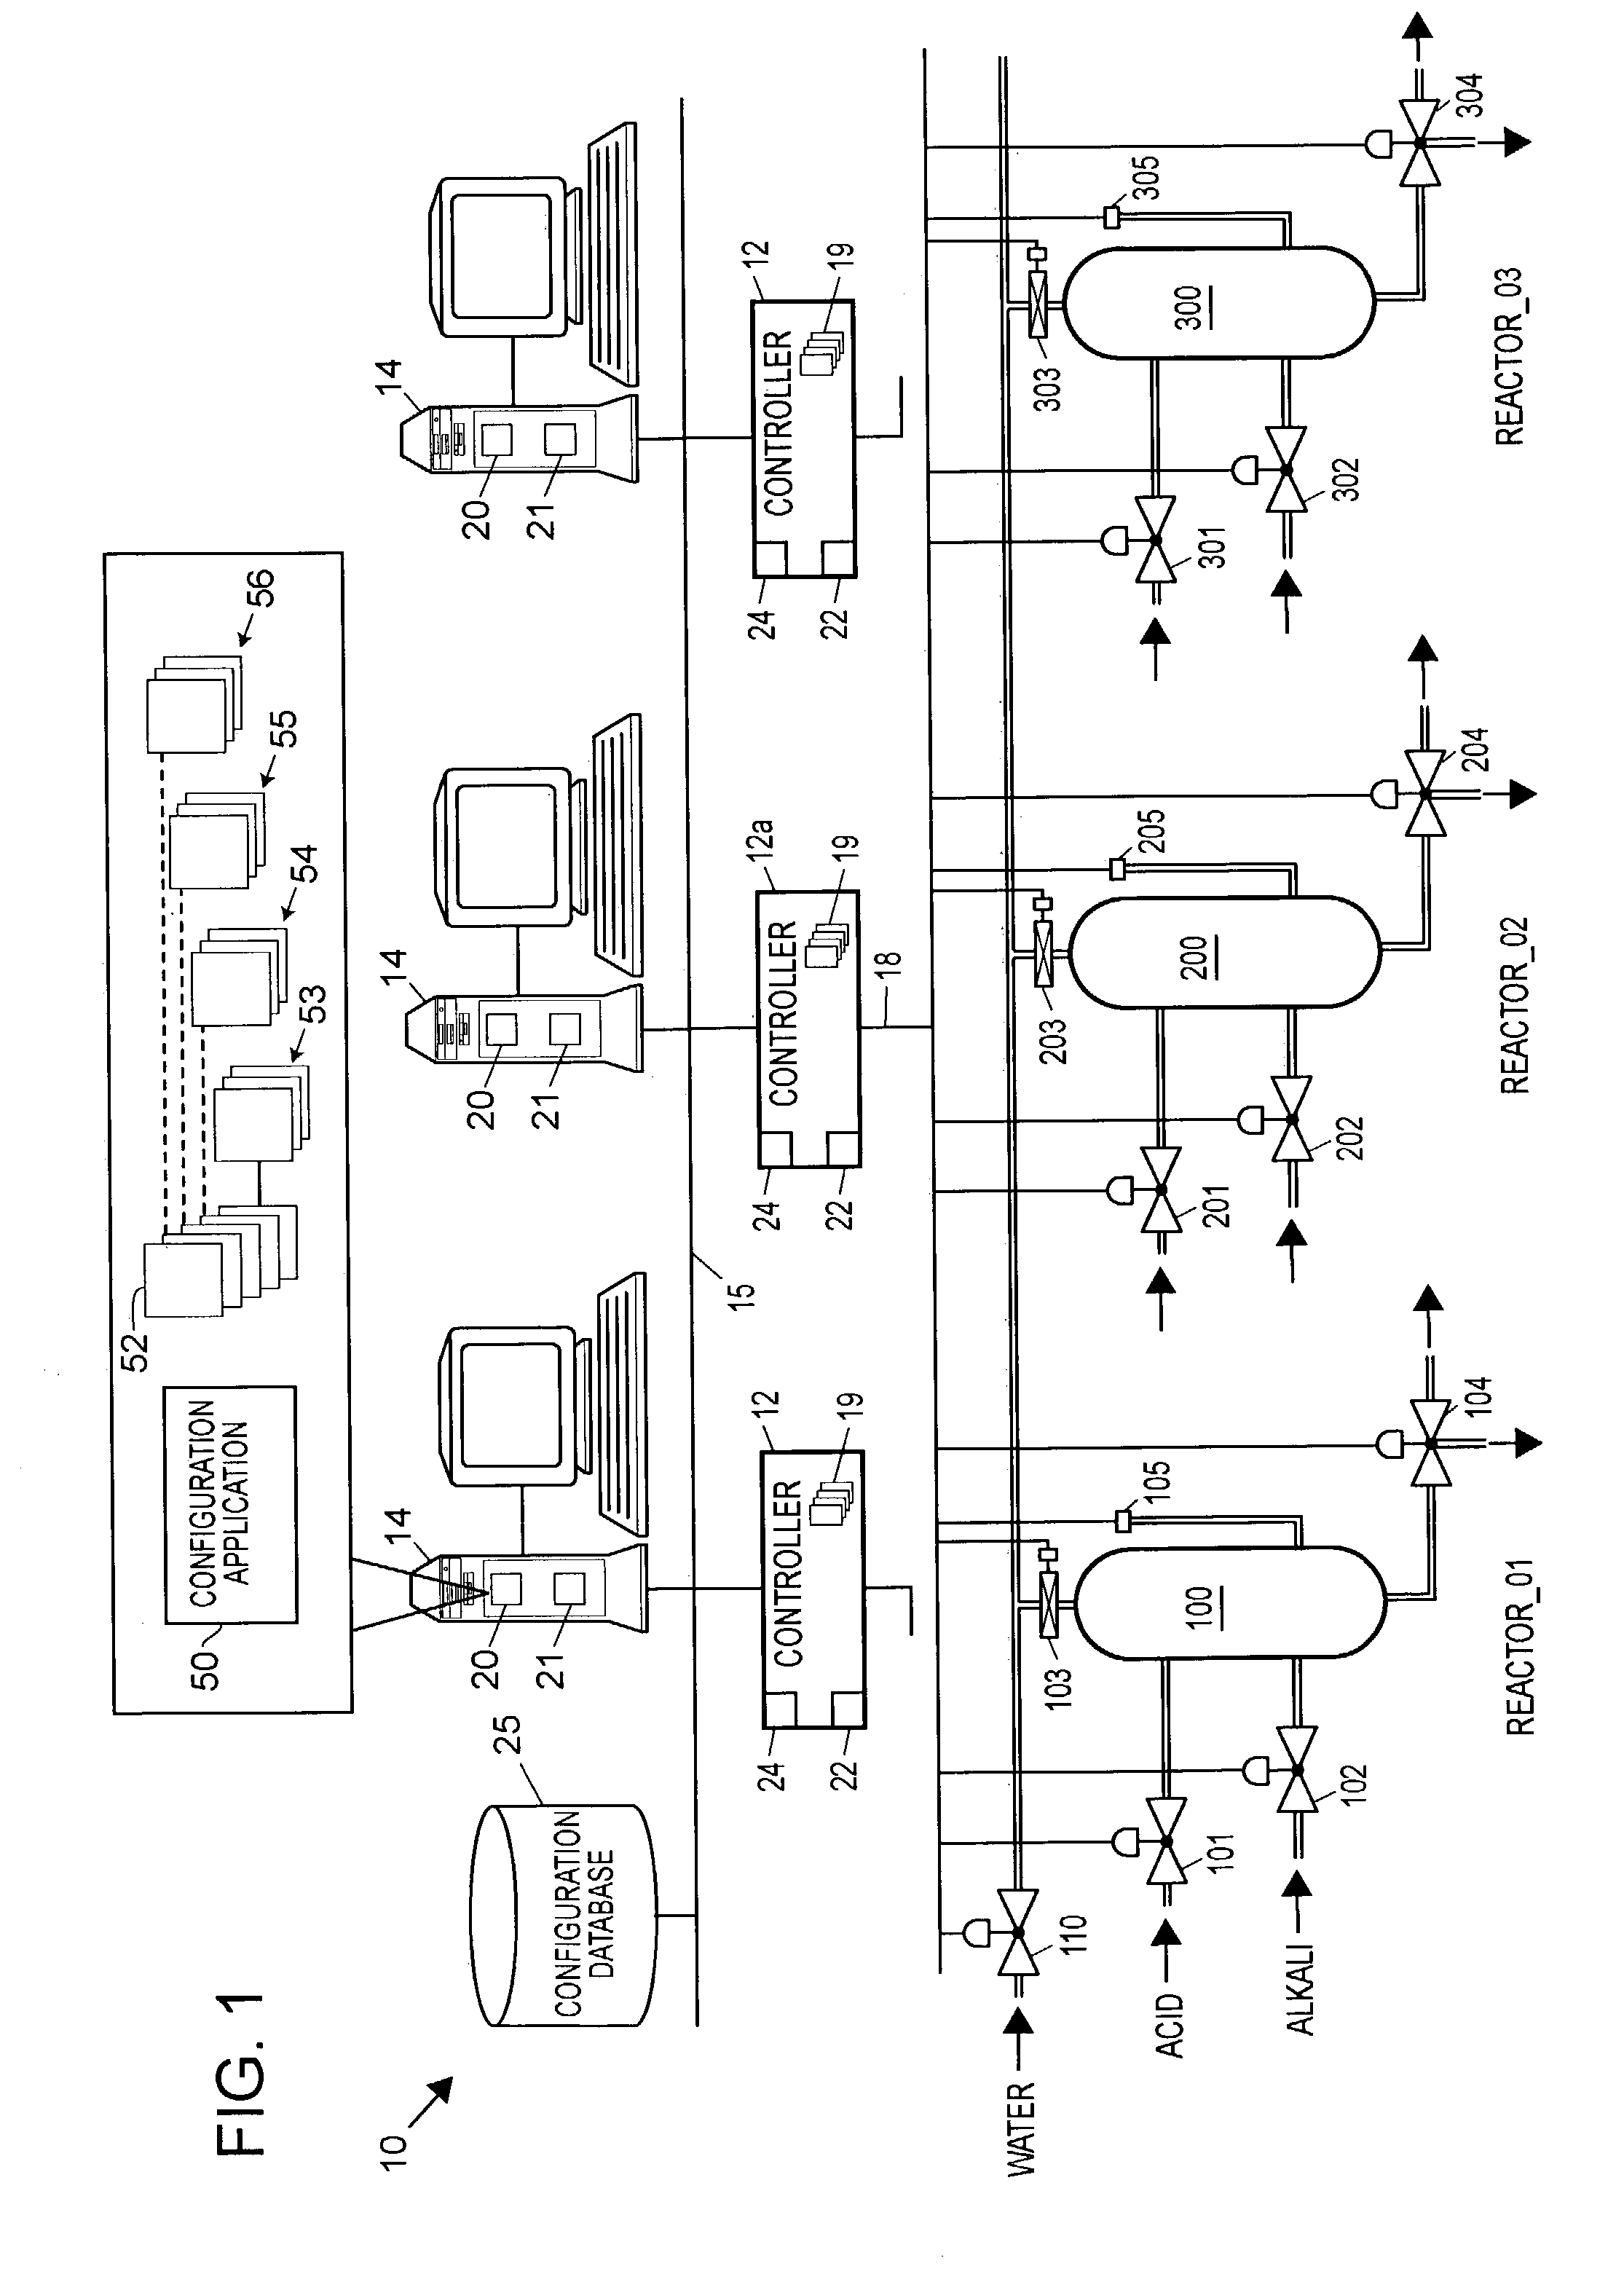 Module class objects in a process plant configuration system